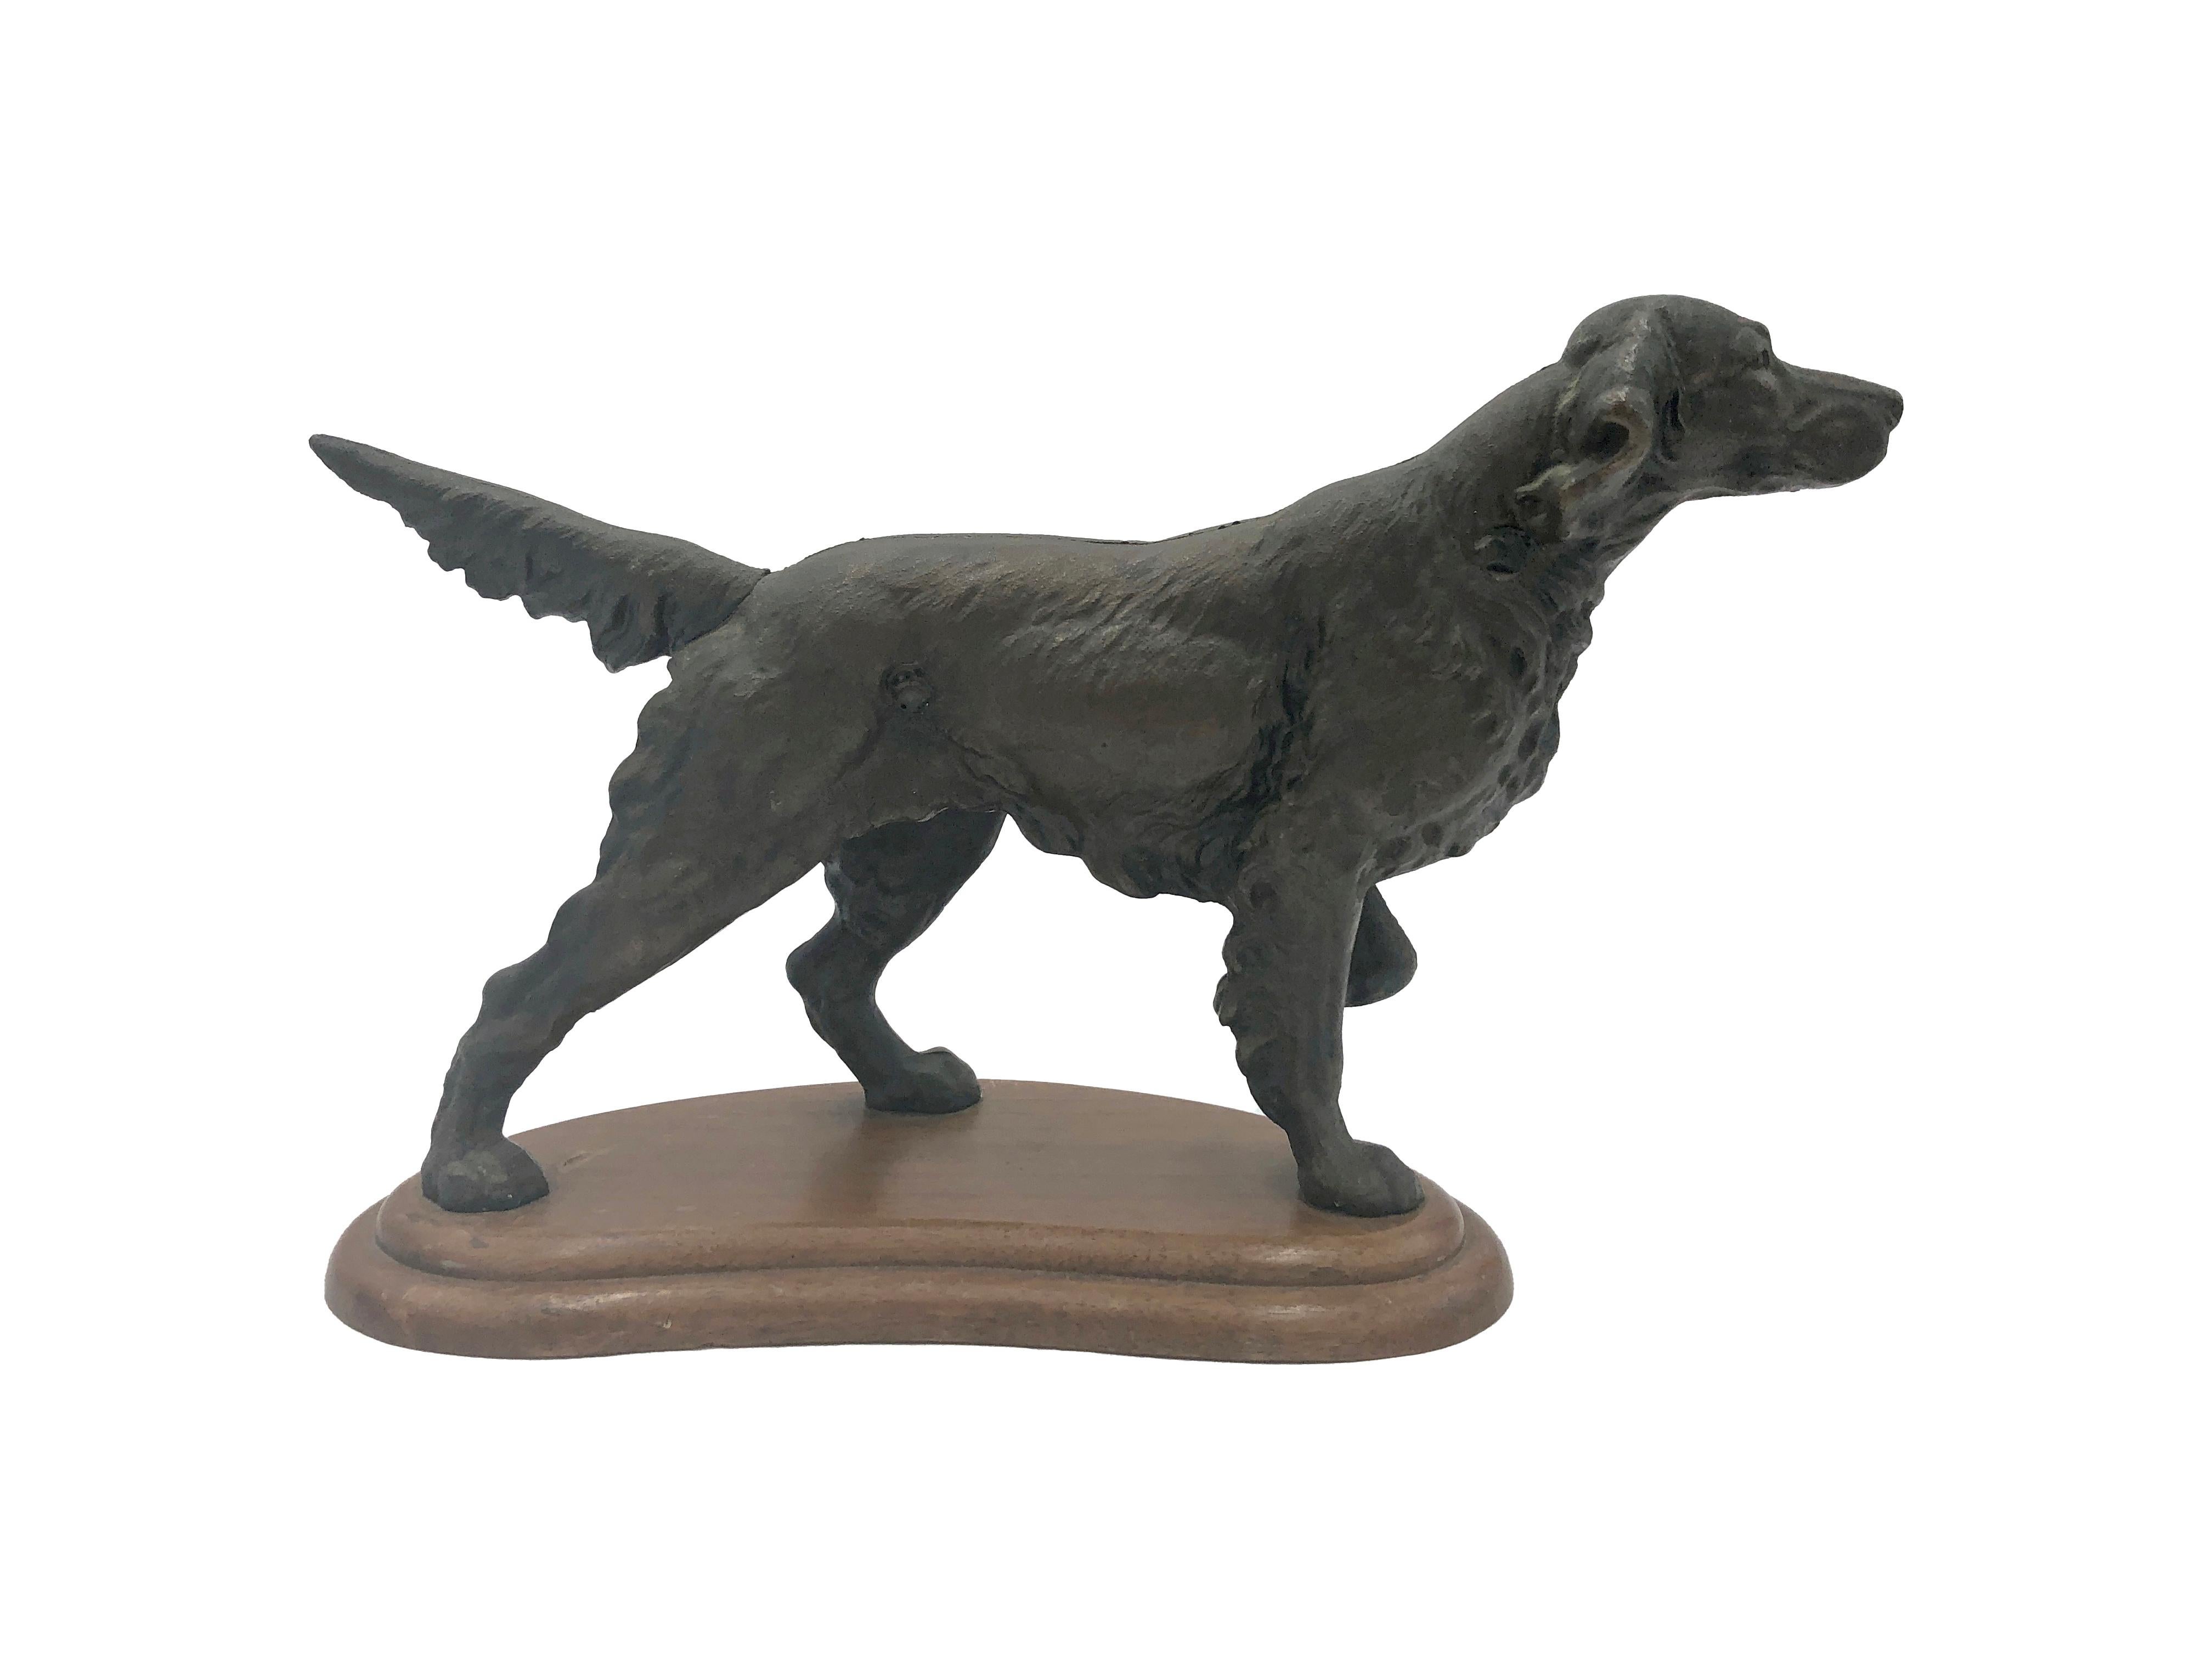 Antique cast iron dog statue of a black pointer made by Hubley. These were often used as door stops. Featuring a kidney shaped wood base with slotted screws. This can be seen at our 333 West 52nd St location in the Theater District West of Manhattan.